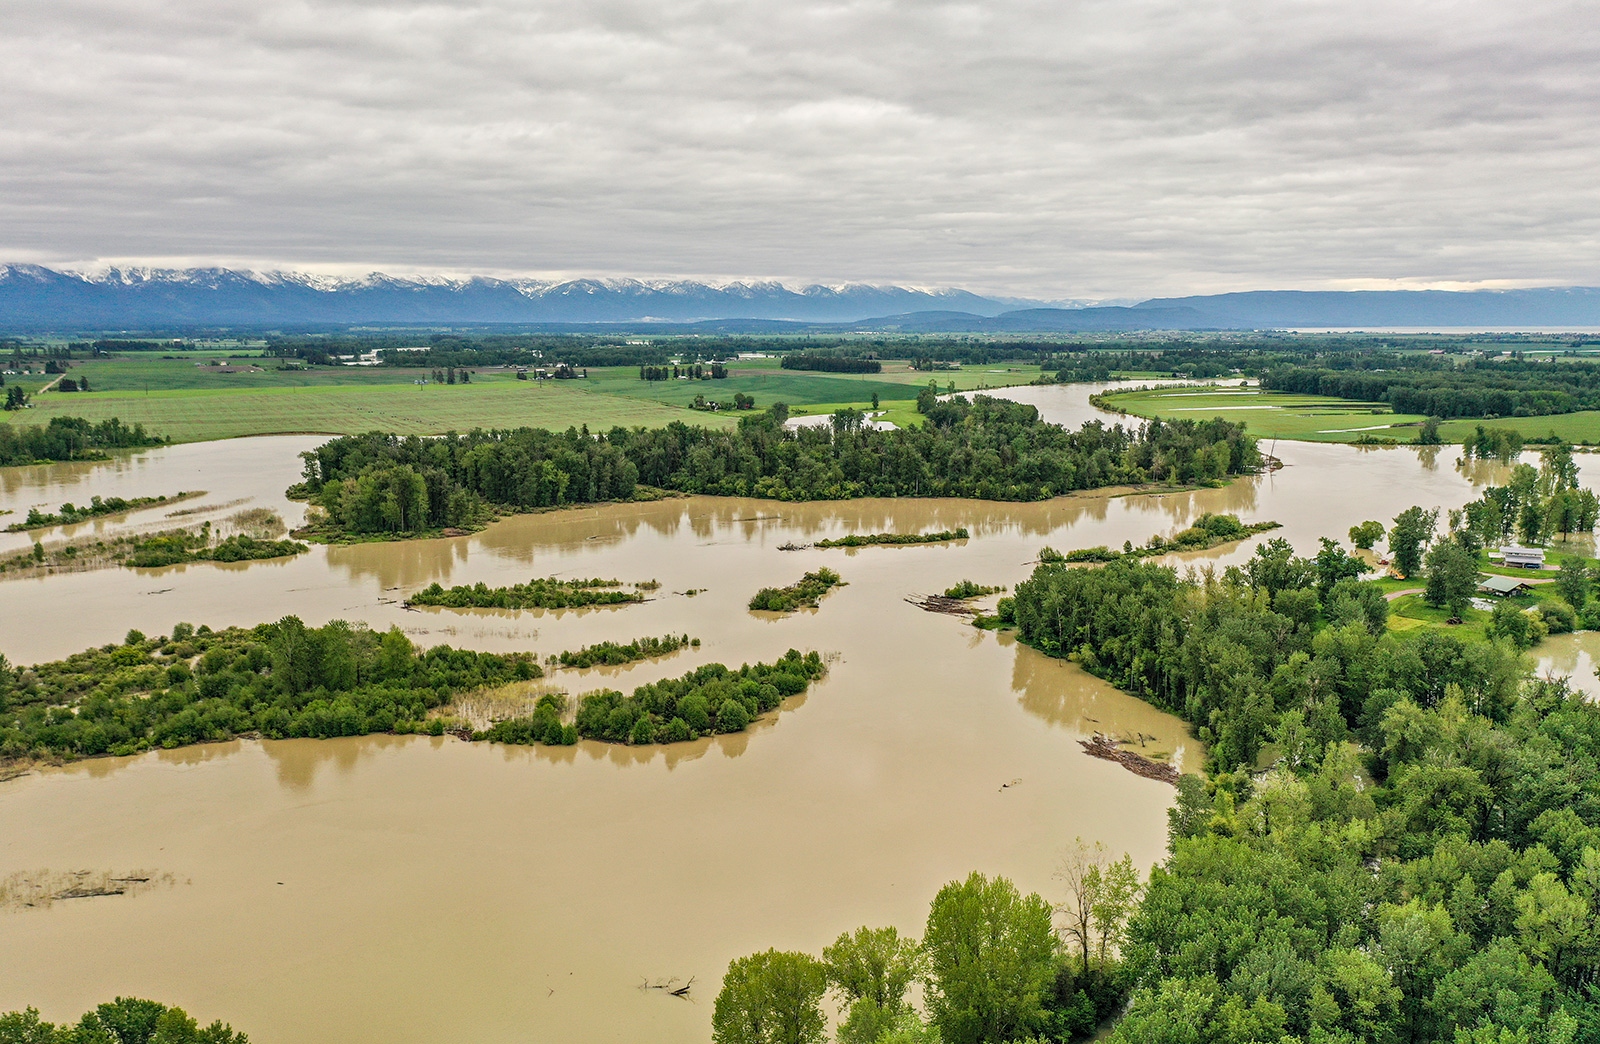 Under cloudy skies, brown flood waters swamp forest and plains, with mountains in the background.